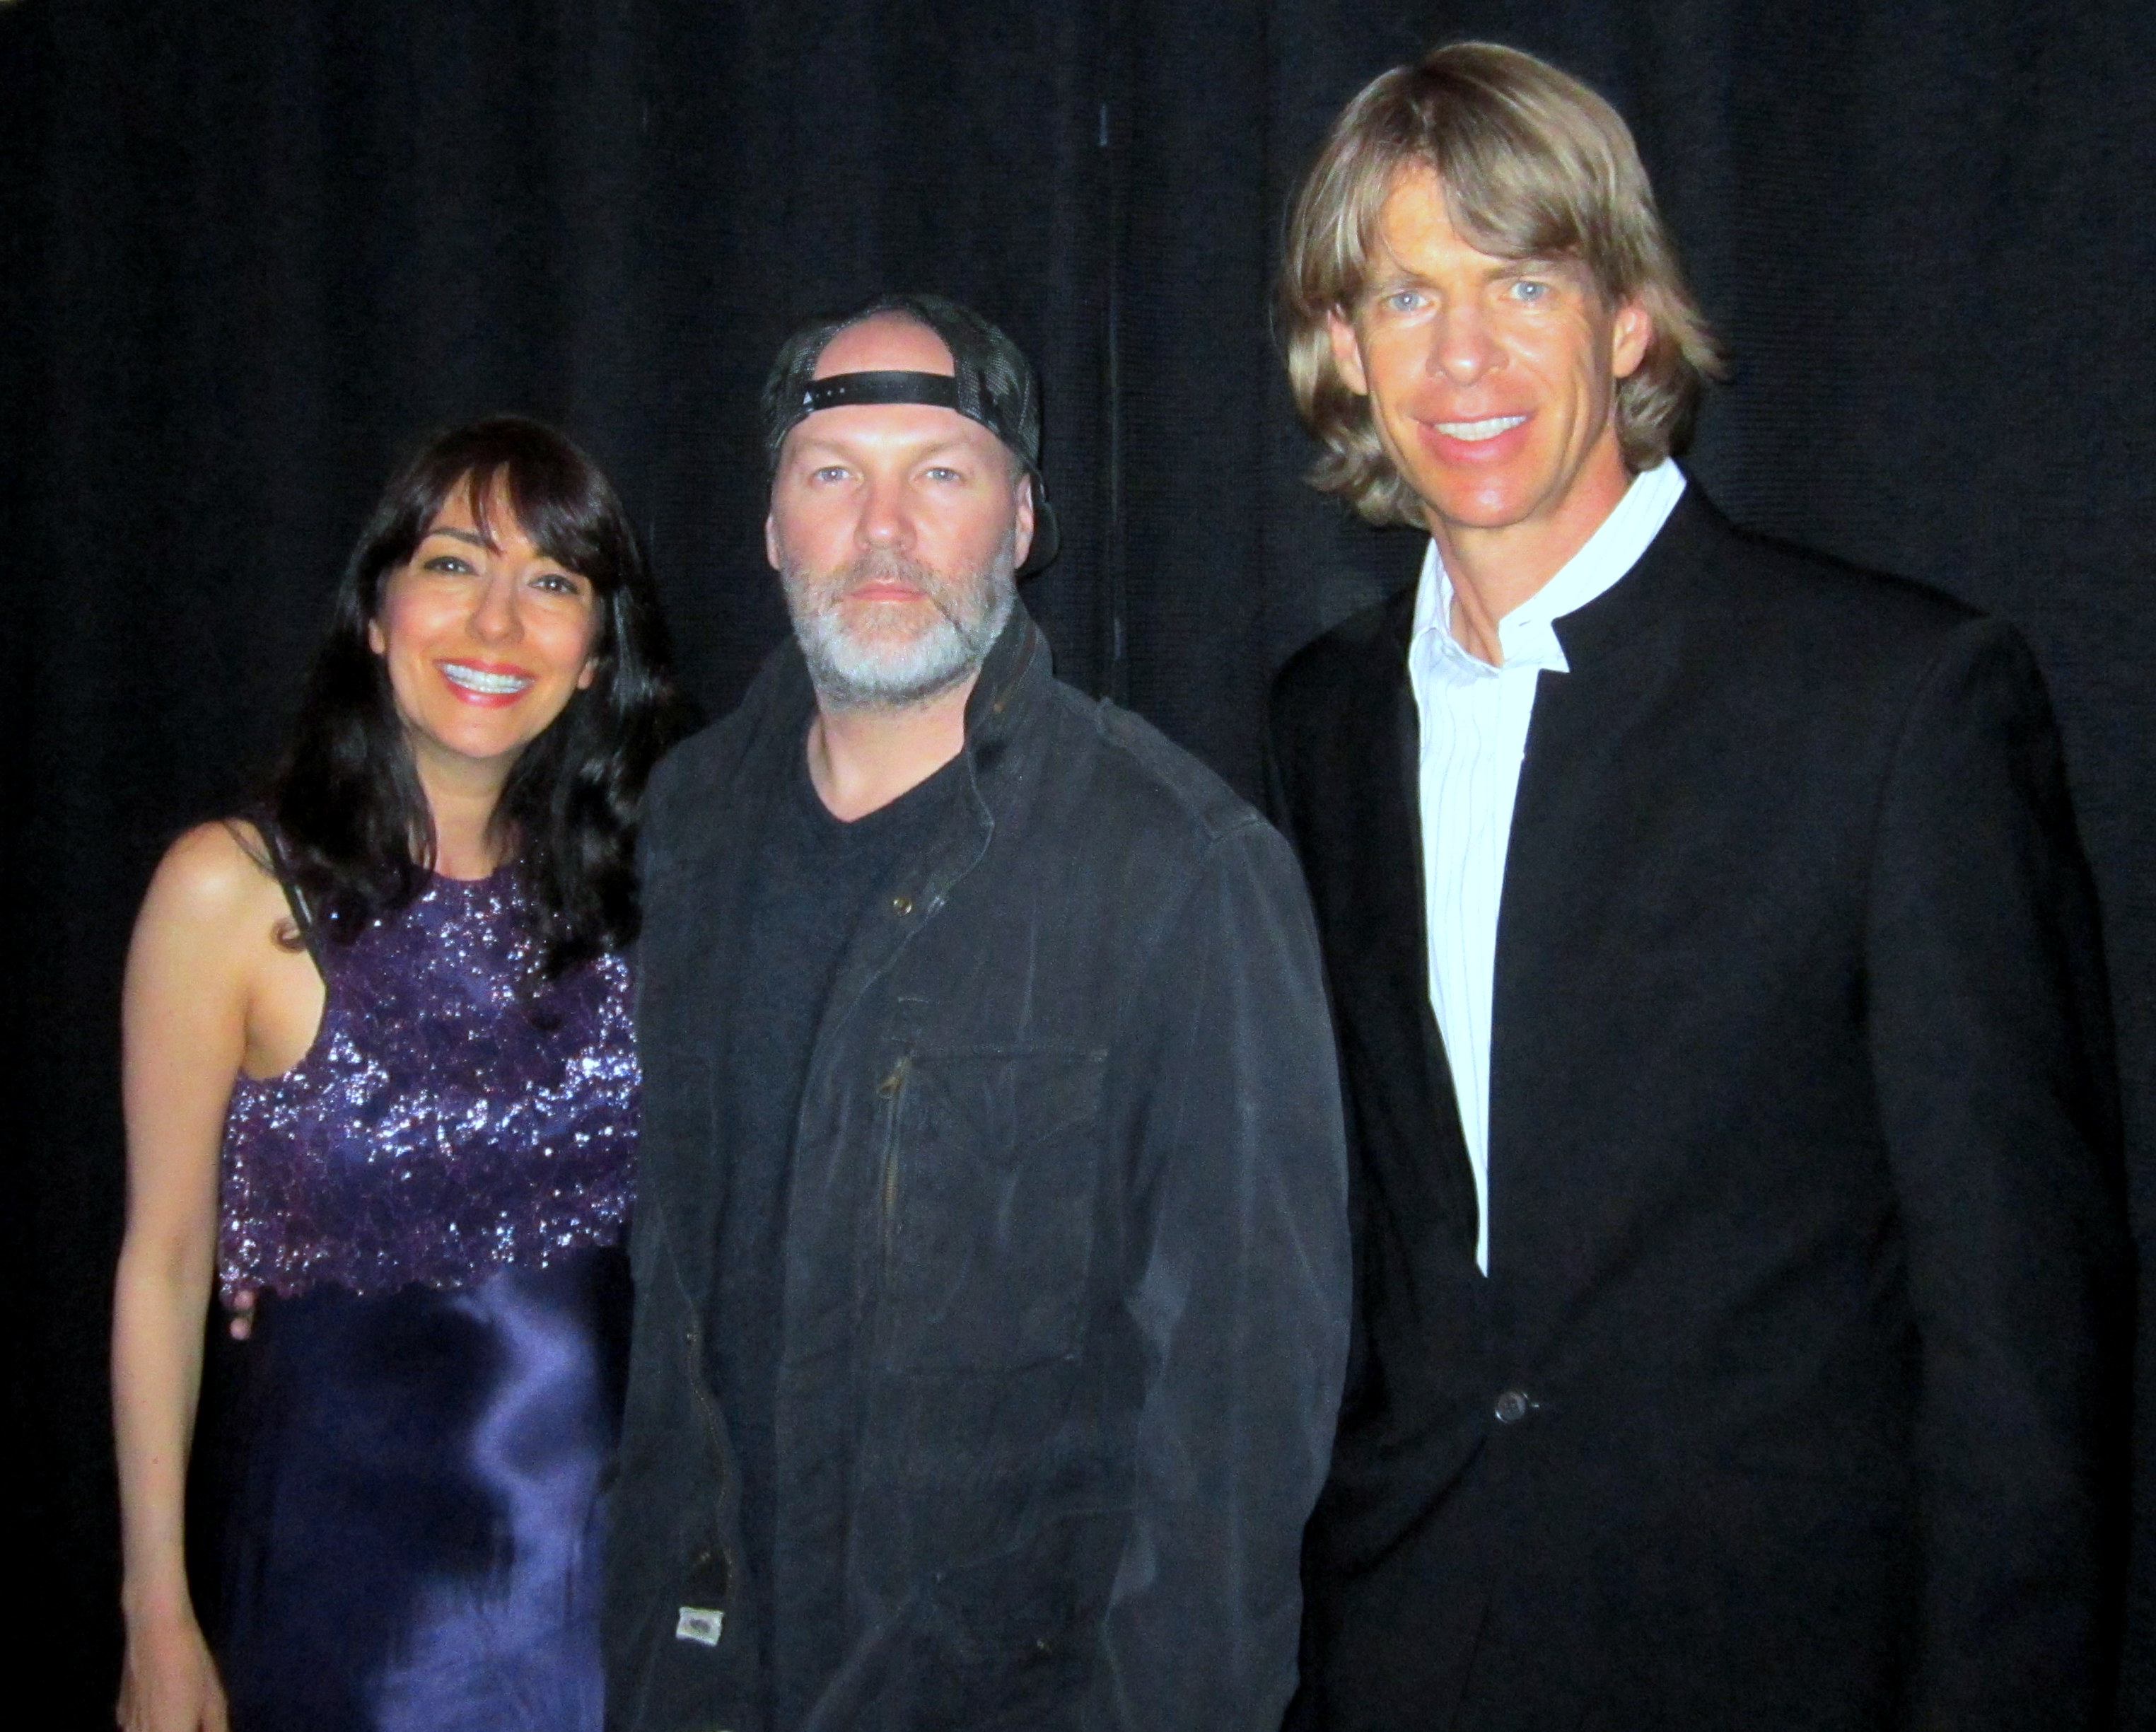 Luciana Lagana and her husband Gregory Graham with Fred Durst, who produced the feature film 